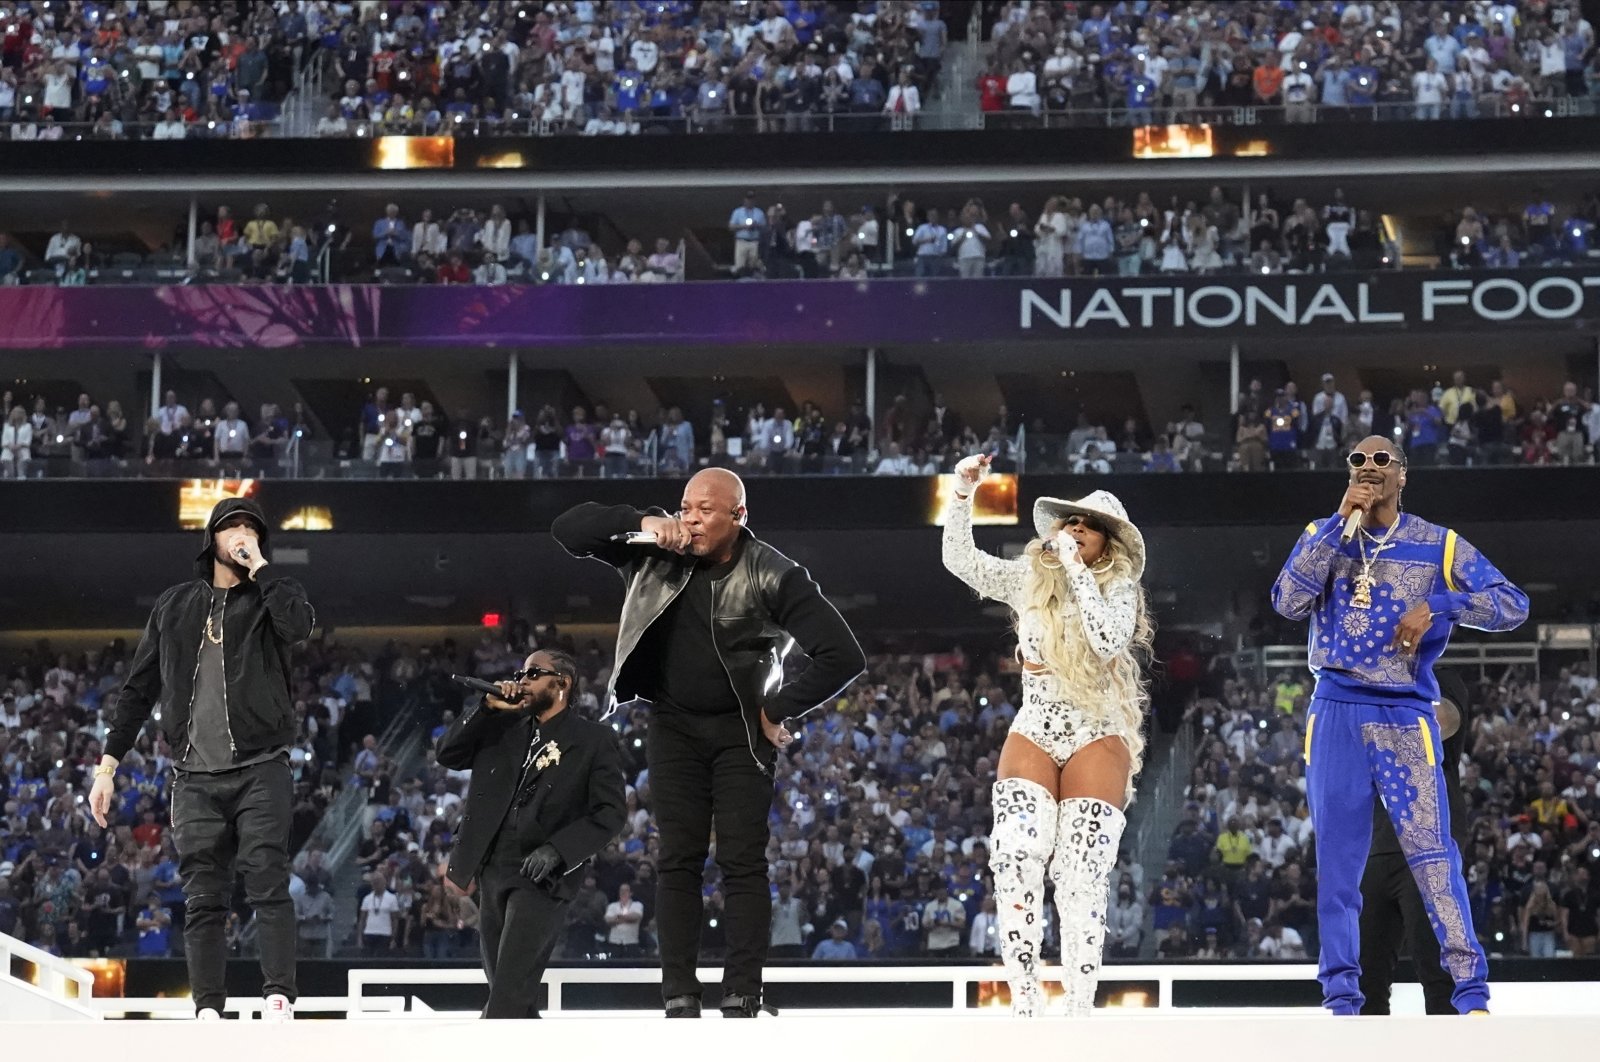 Eminem (from L) performs with Kendrick Lamar, Dr. Dre, Mary J. Blige and Snoop Dogg during halftime of the NFL Super Bowl 56 football game between the Los Angeles Rams and the Cincinnati Bengals, Feb. 13, 2022, Inglewood, California, U.S. (AP Photo)